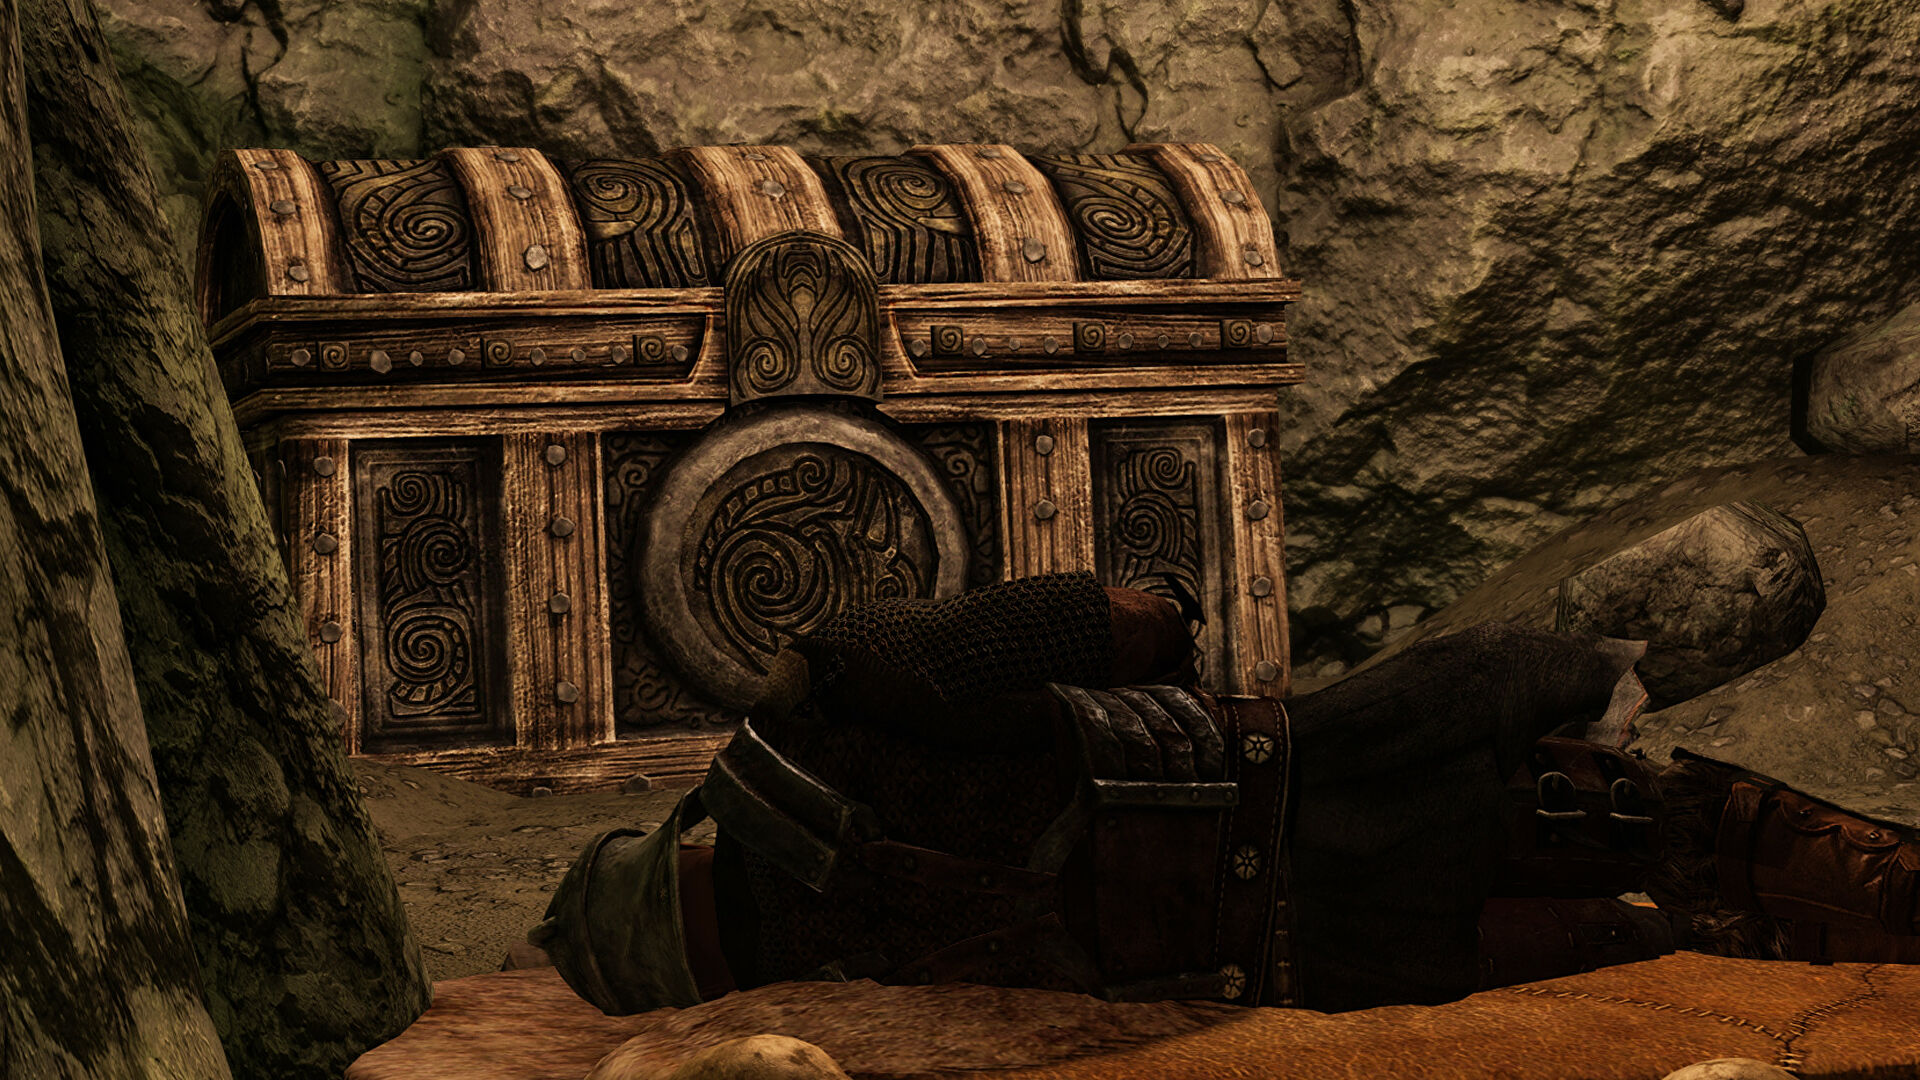 Skyrim mod adds hidden keys to find for all those locked chests